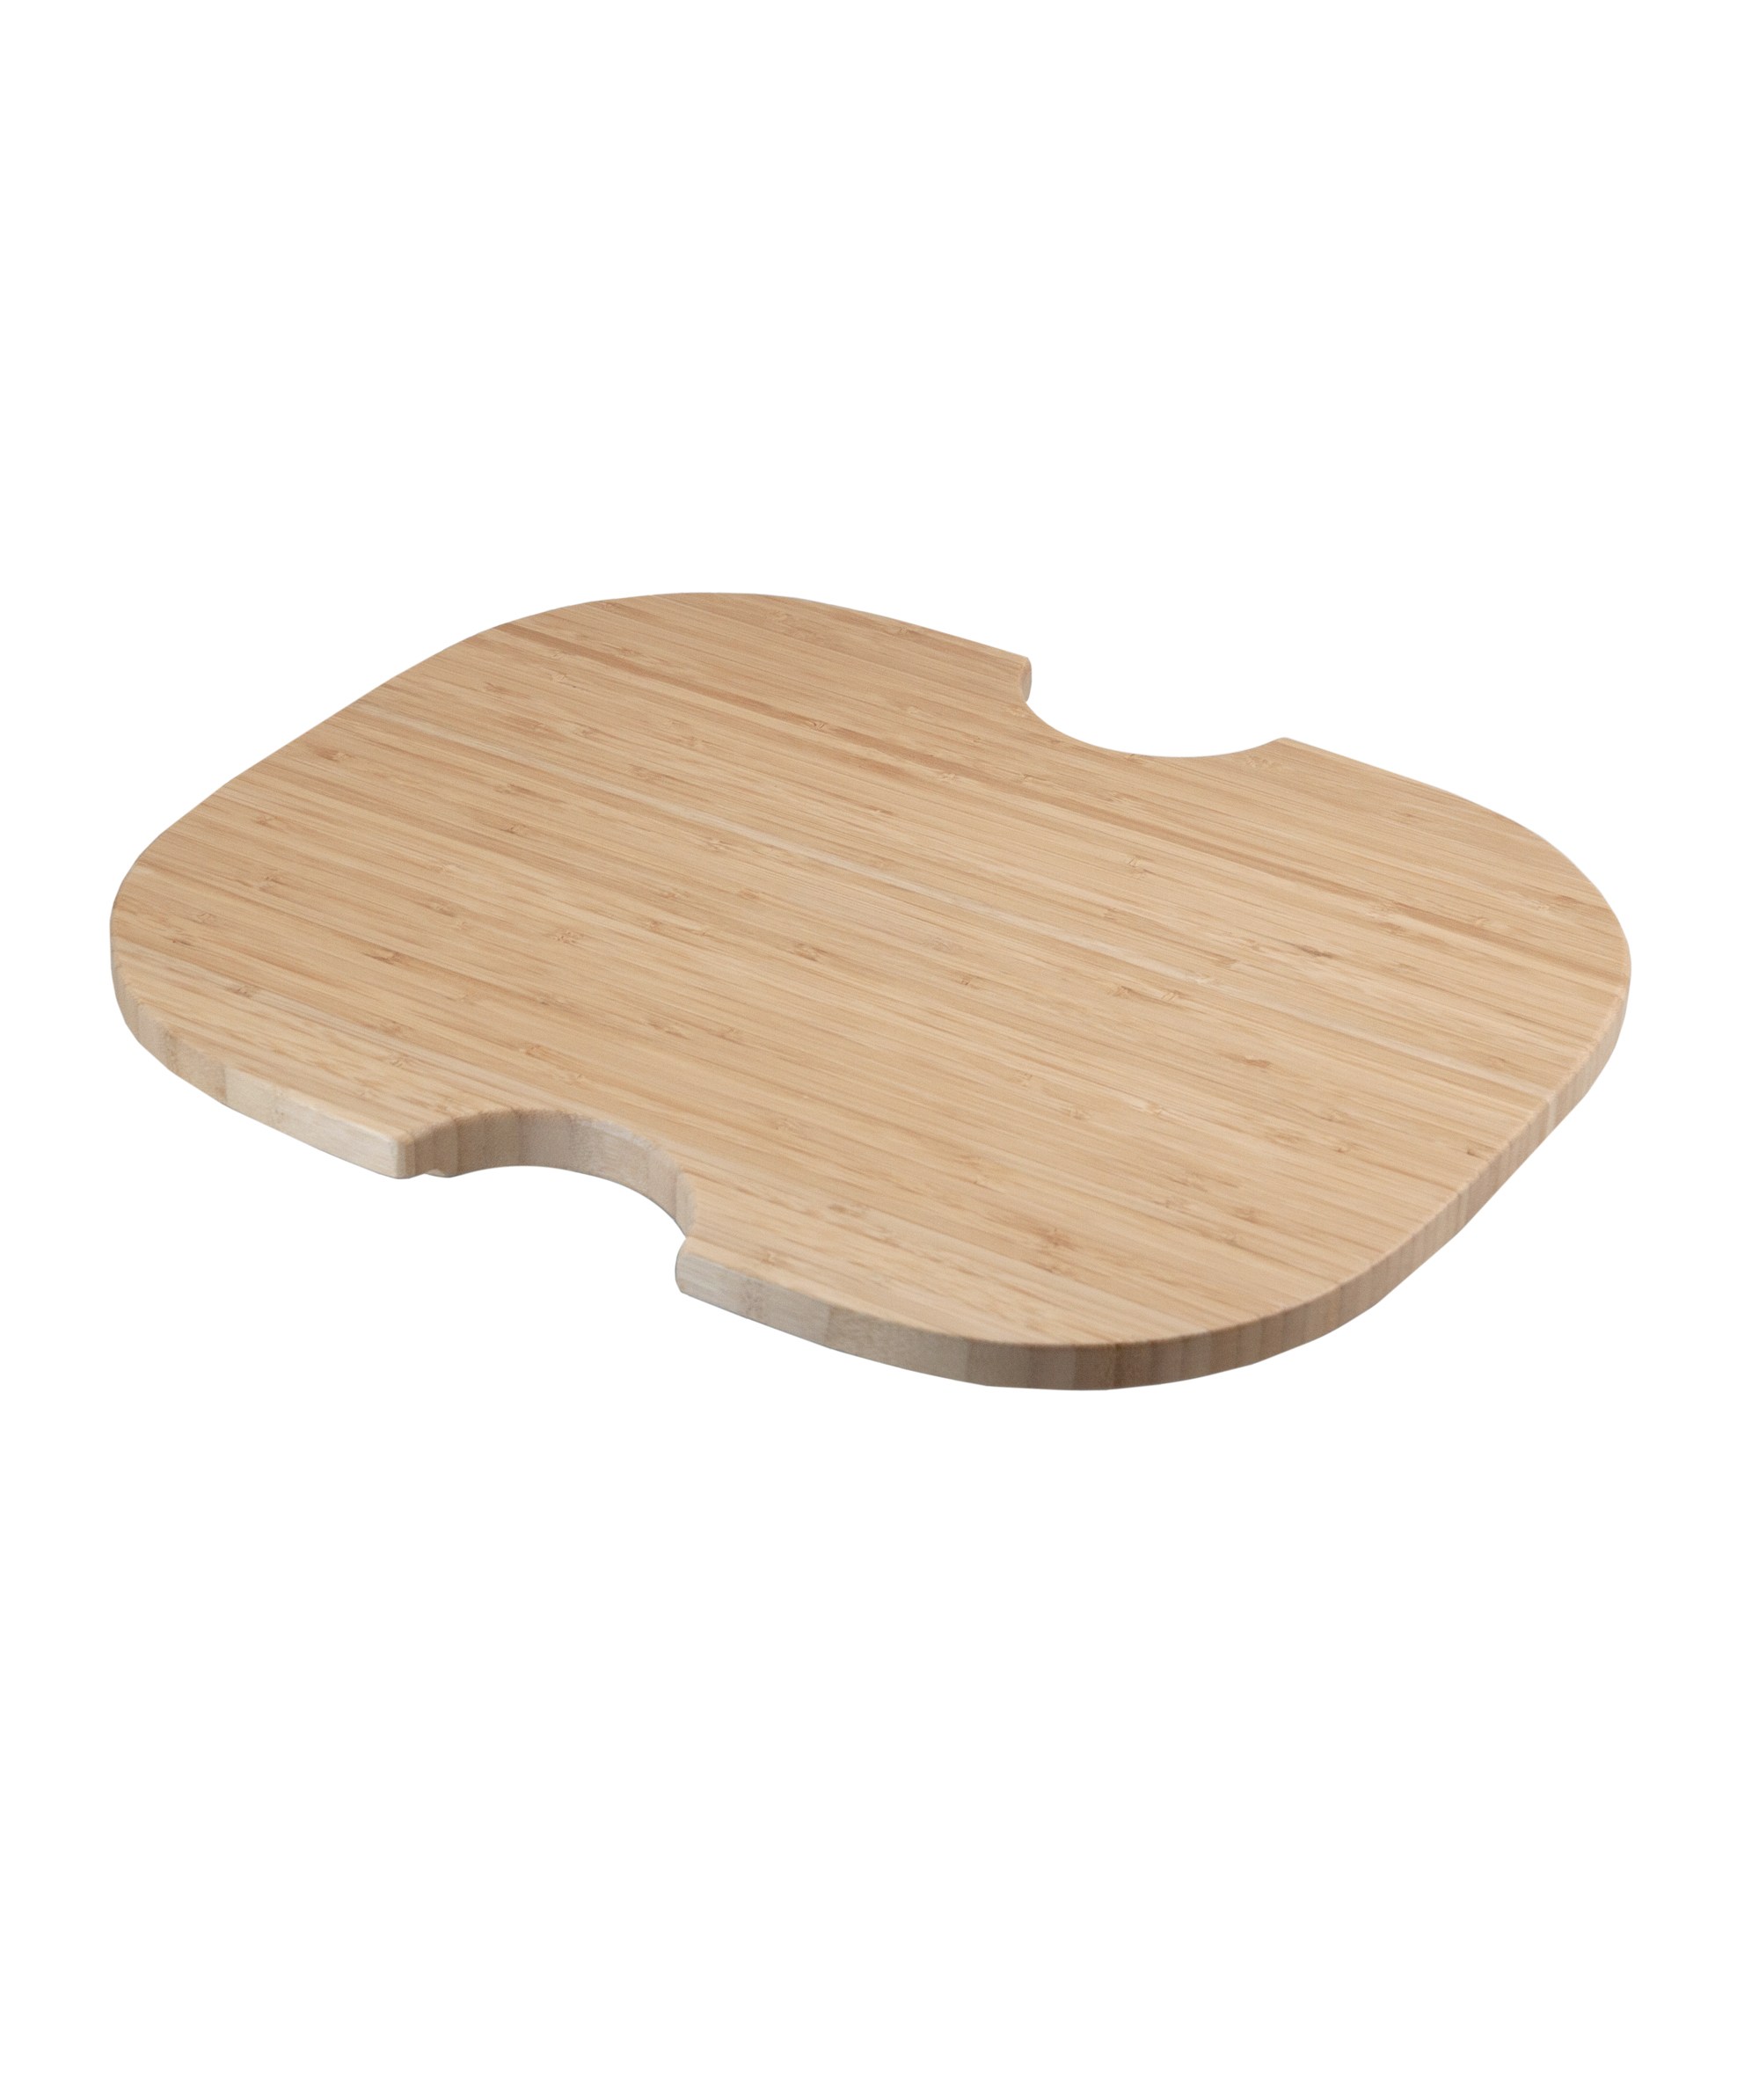 Cutting Board 06 - for Acero 754, 780, 1162 stainless steel sinks